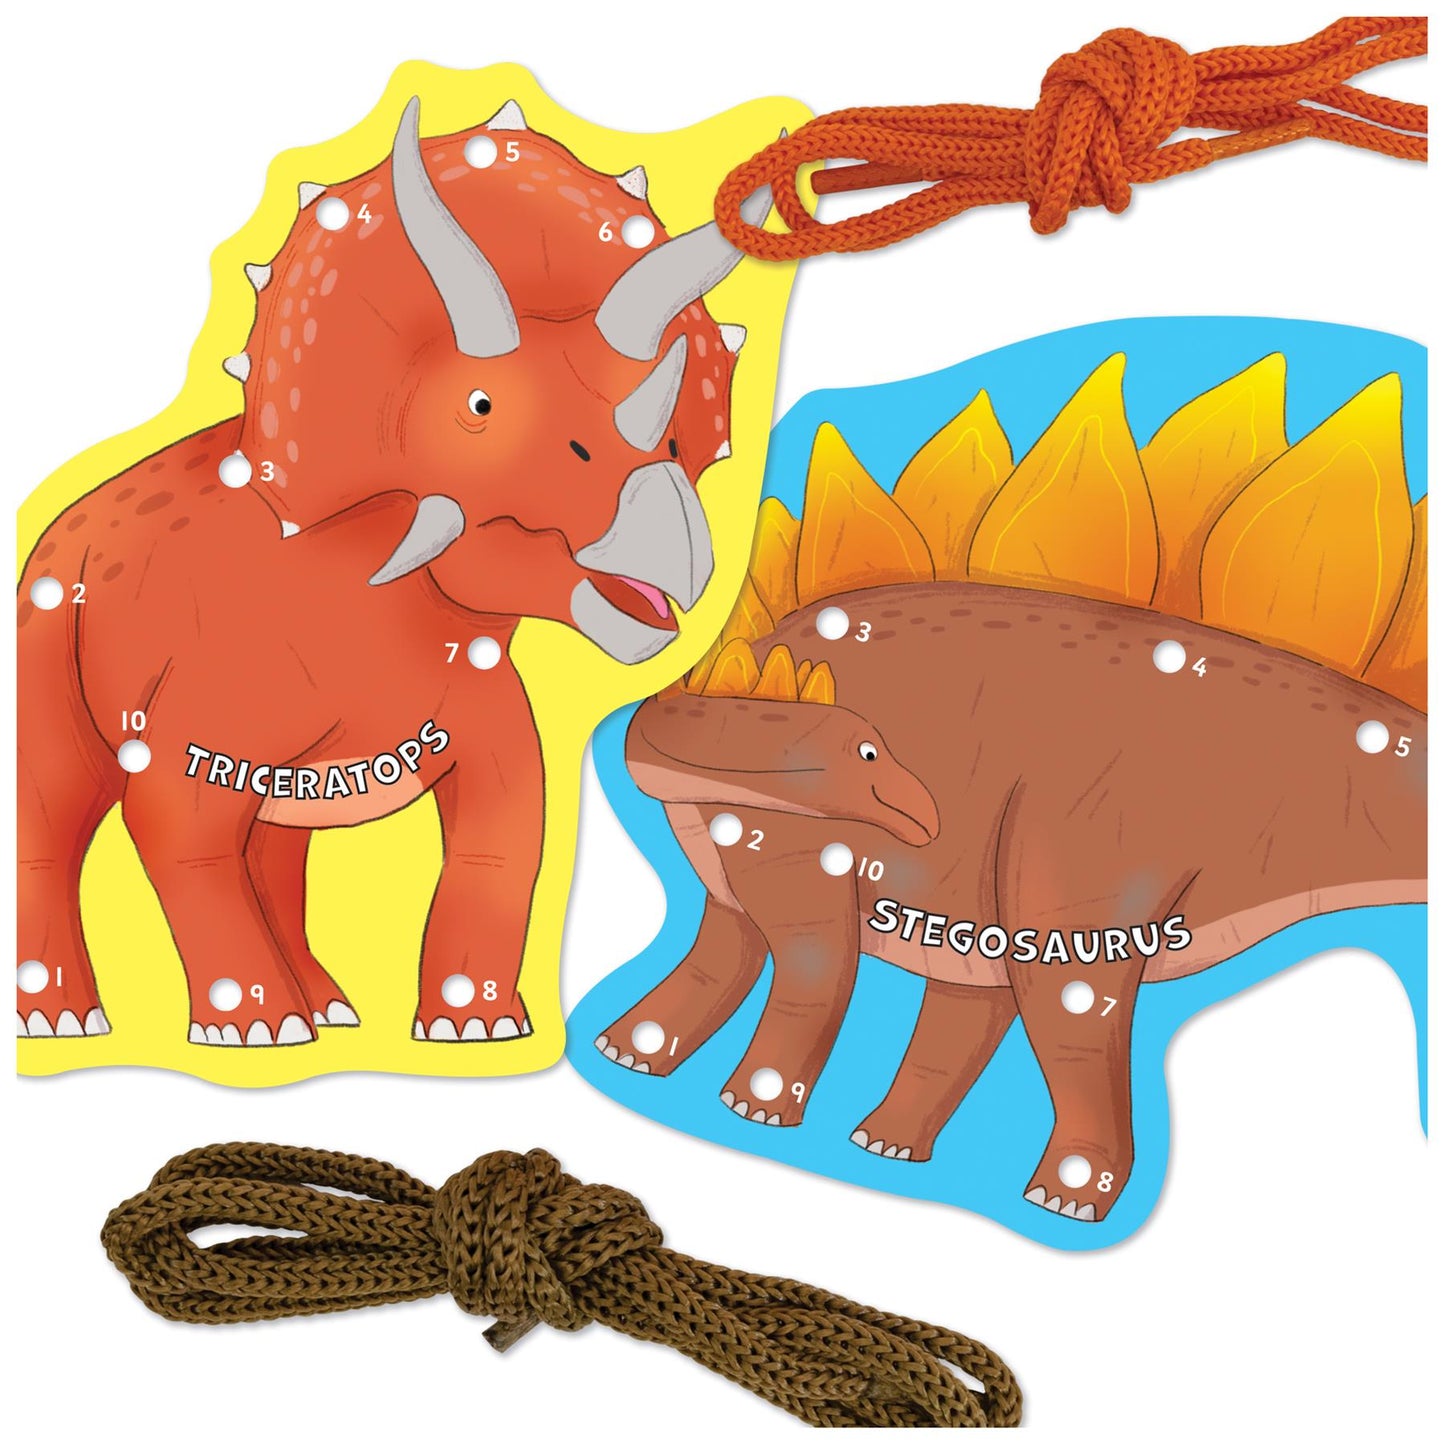 Natural History Museum Let's Learn Dinosaurs Activity Pack